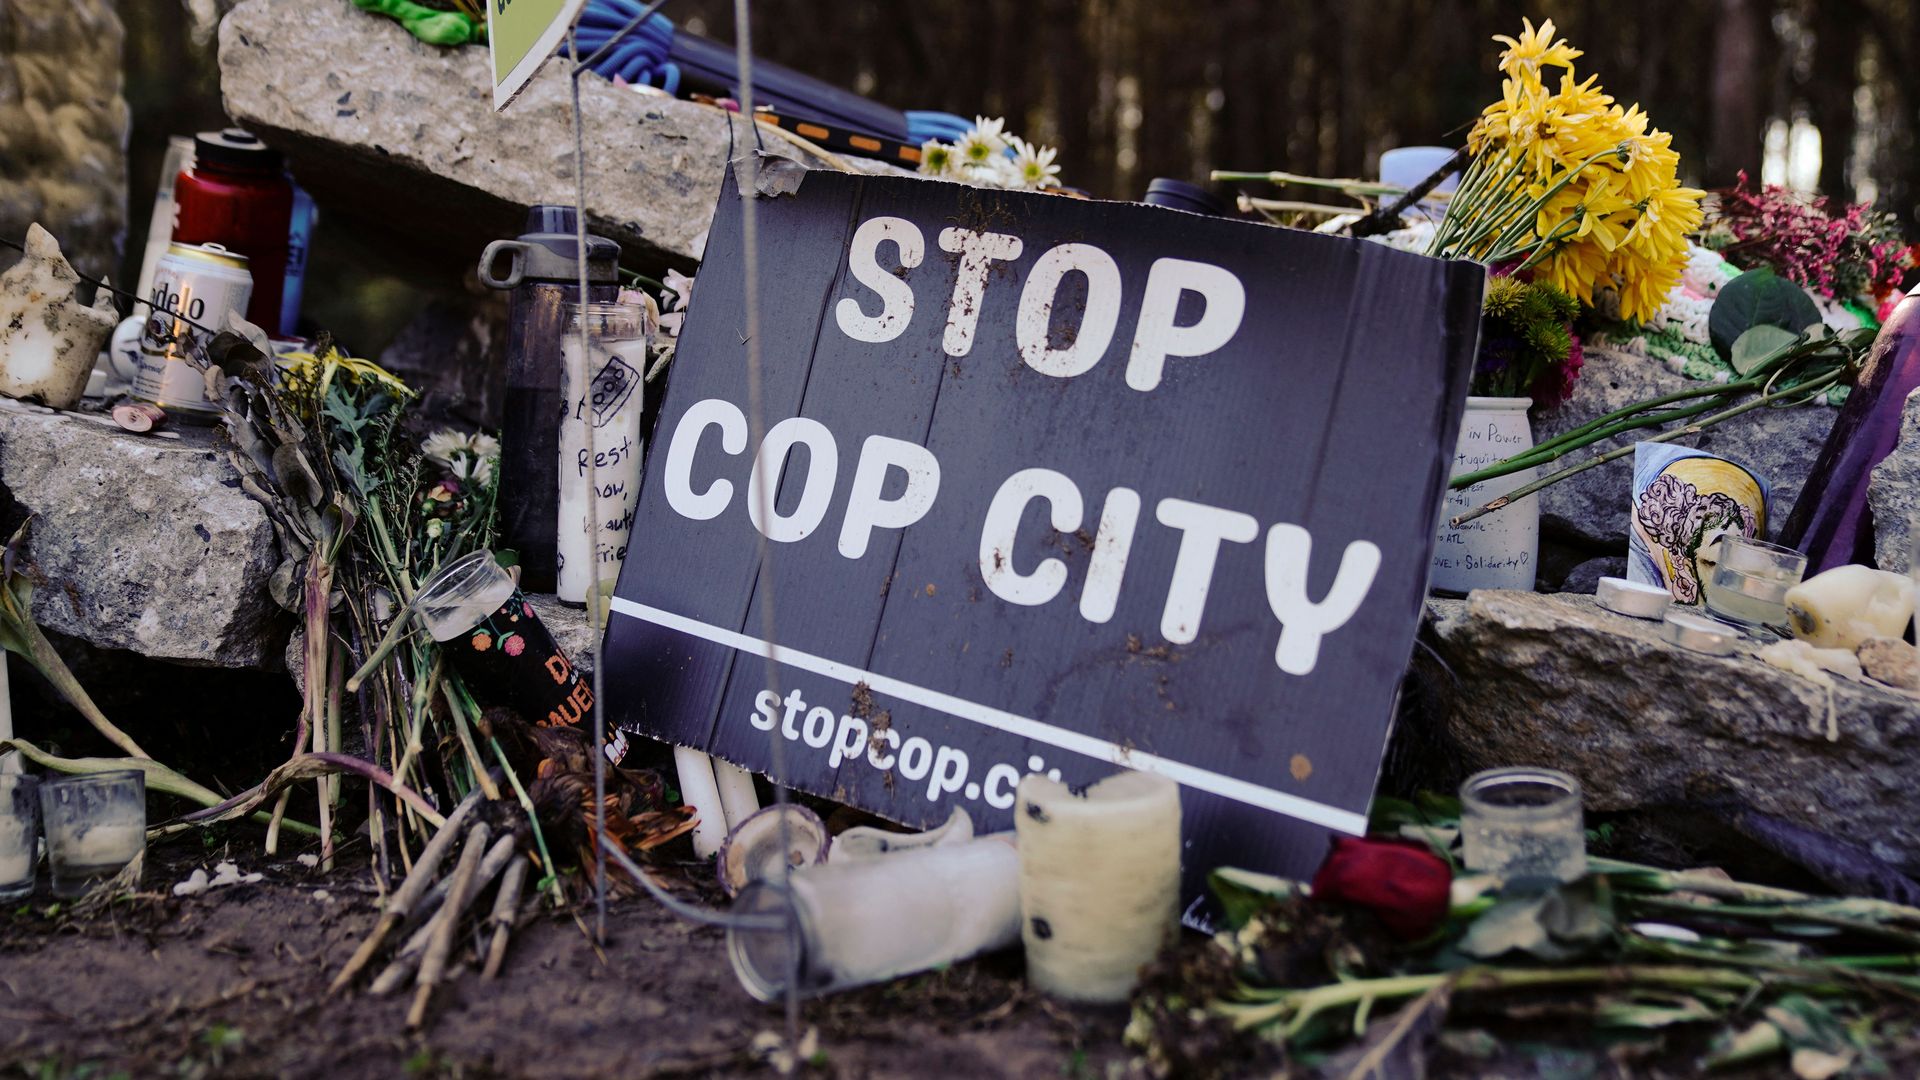 "Stop Cop City" sign placed at memorial to Manuel "Tortuguita" Teran at the site of the Atlanta public safety training center